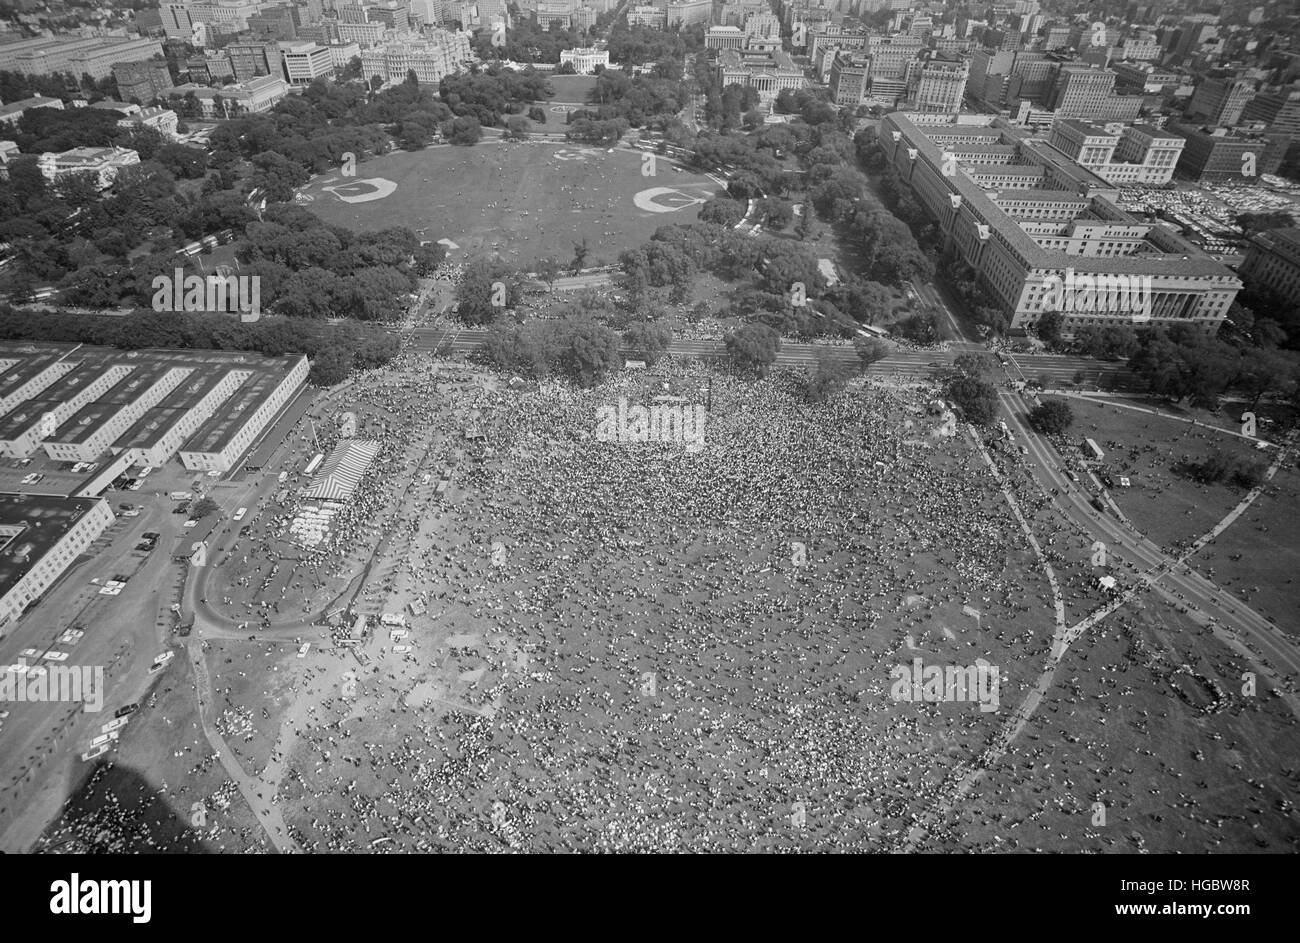 August 28, 1963 - Aerial view, of the March on Washington in Washington, D.C. Stock Photo